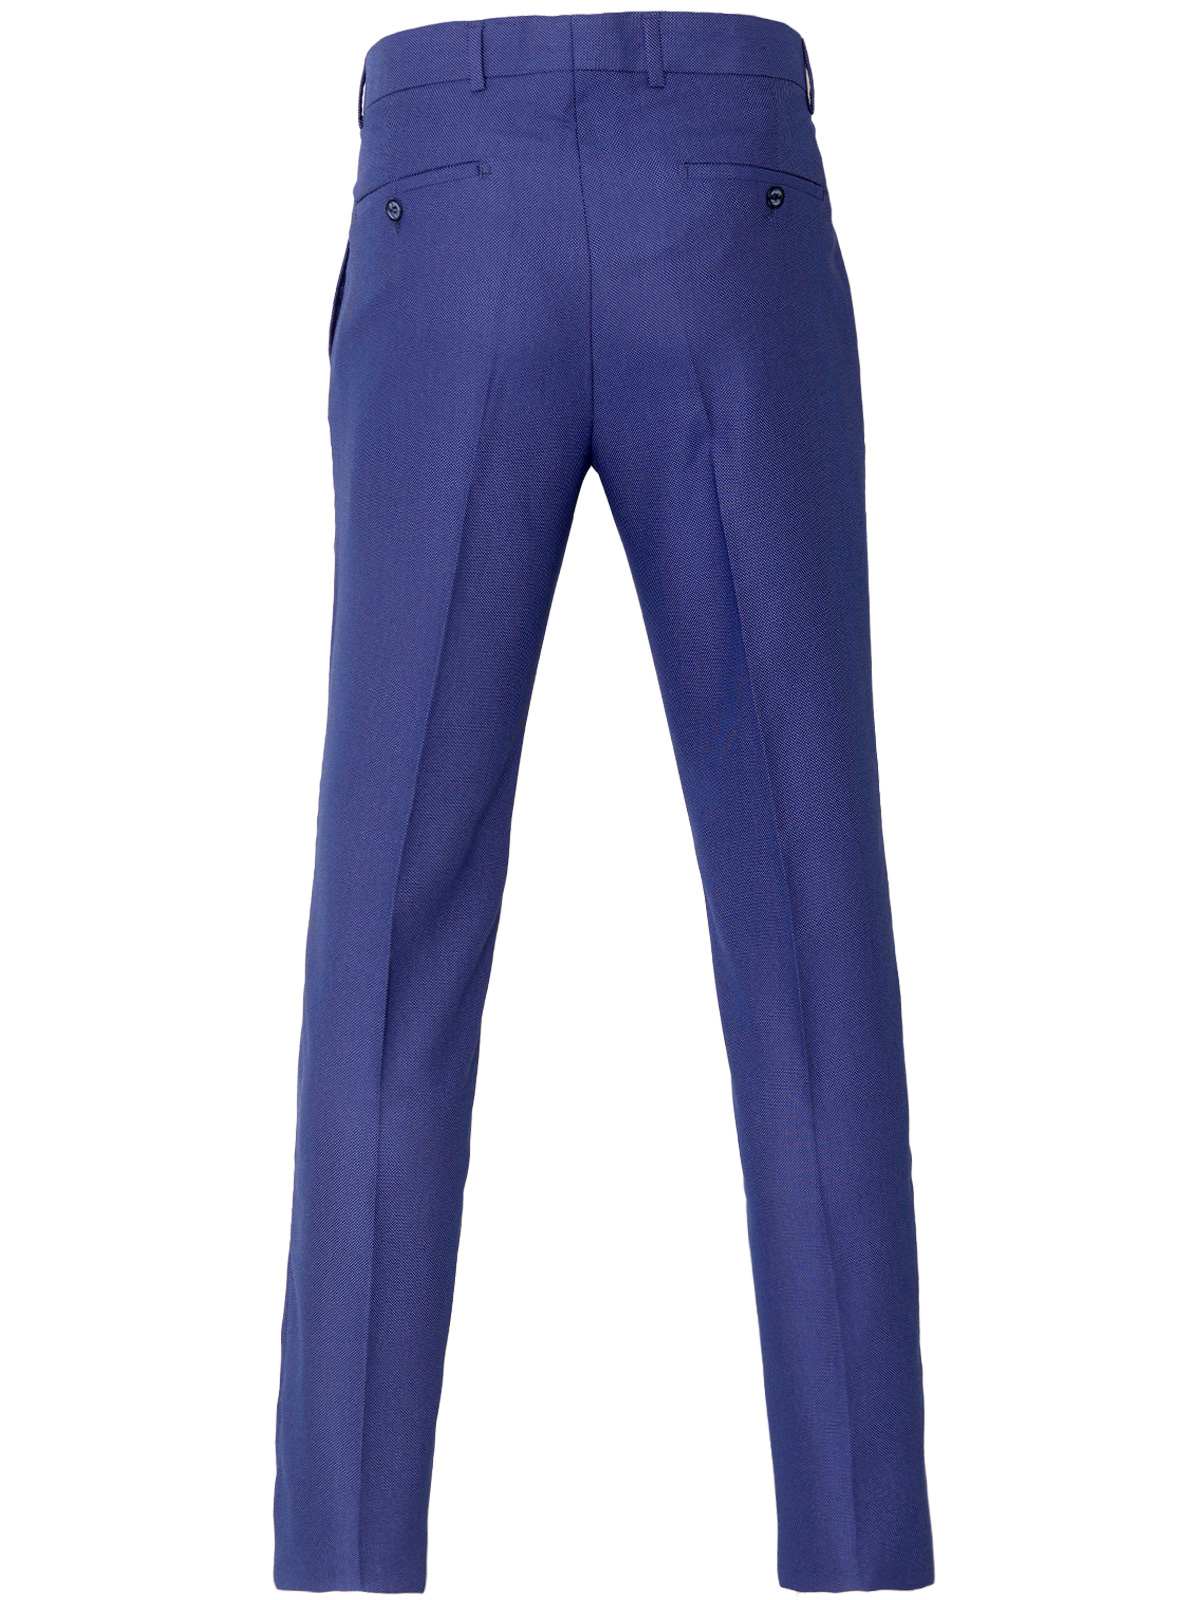 Mens trousers in classic blue - 63341 € 62.99 img2